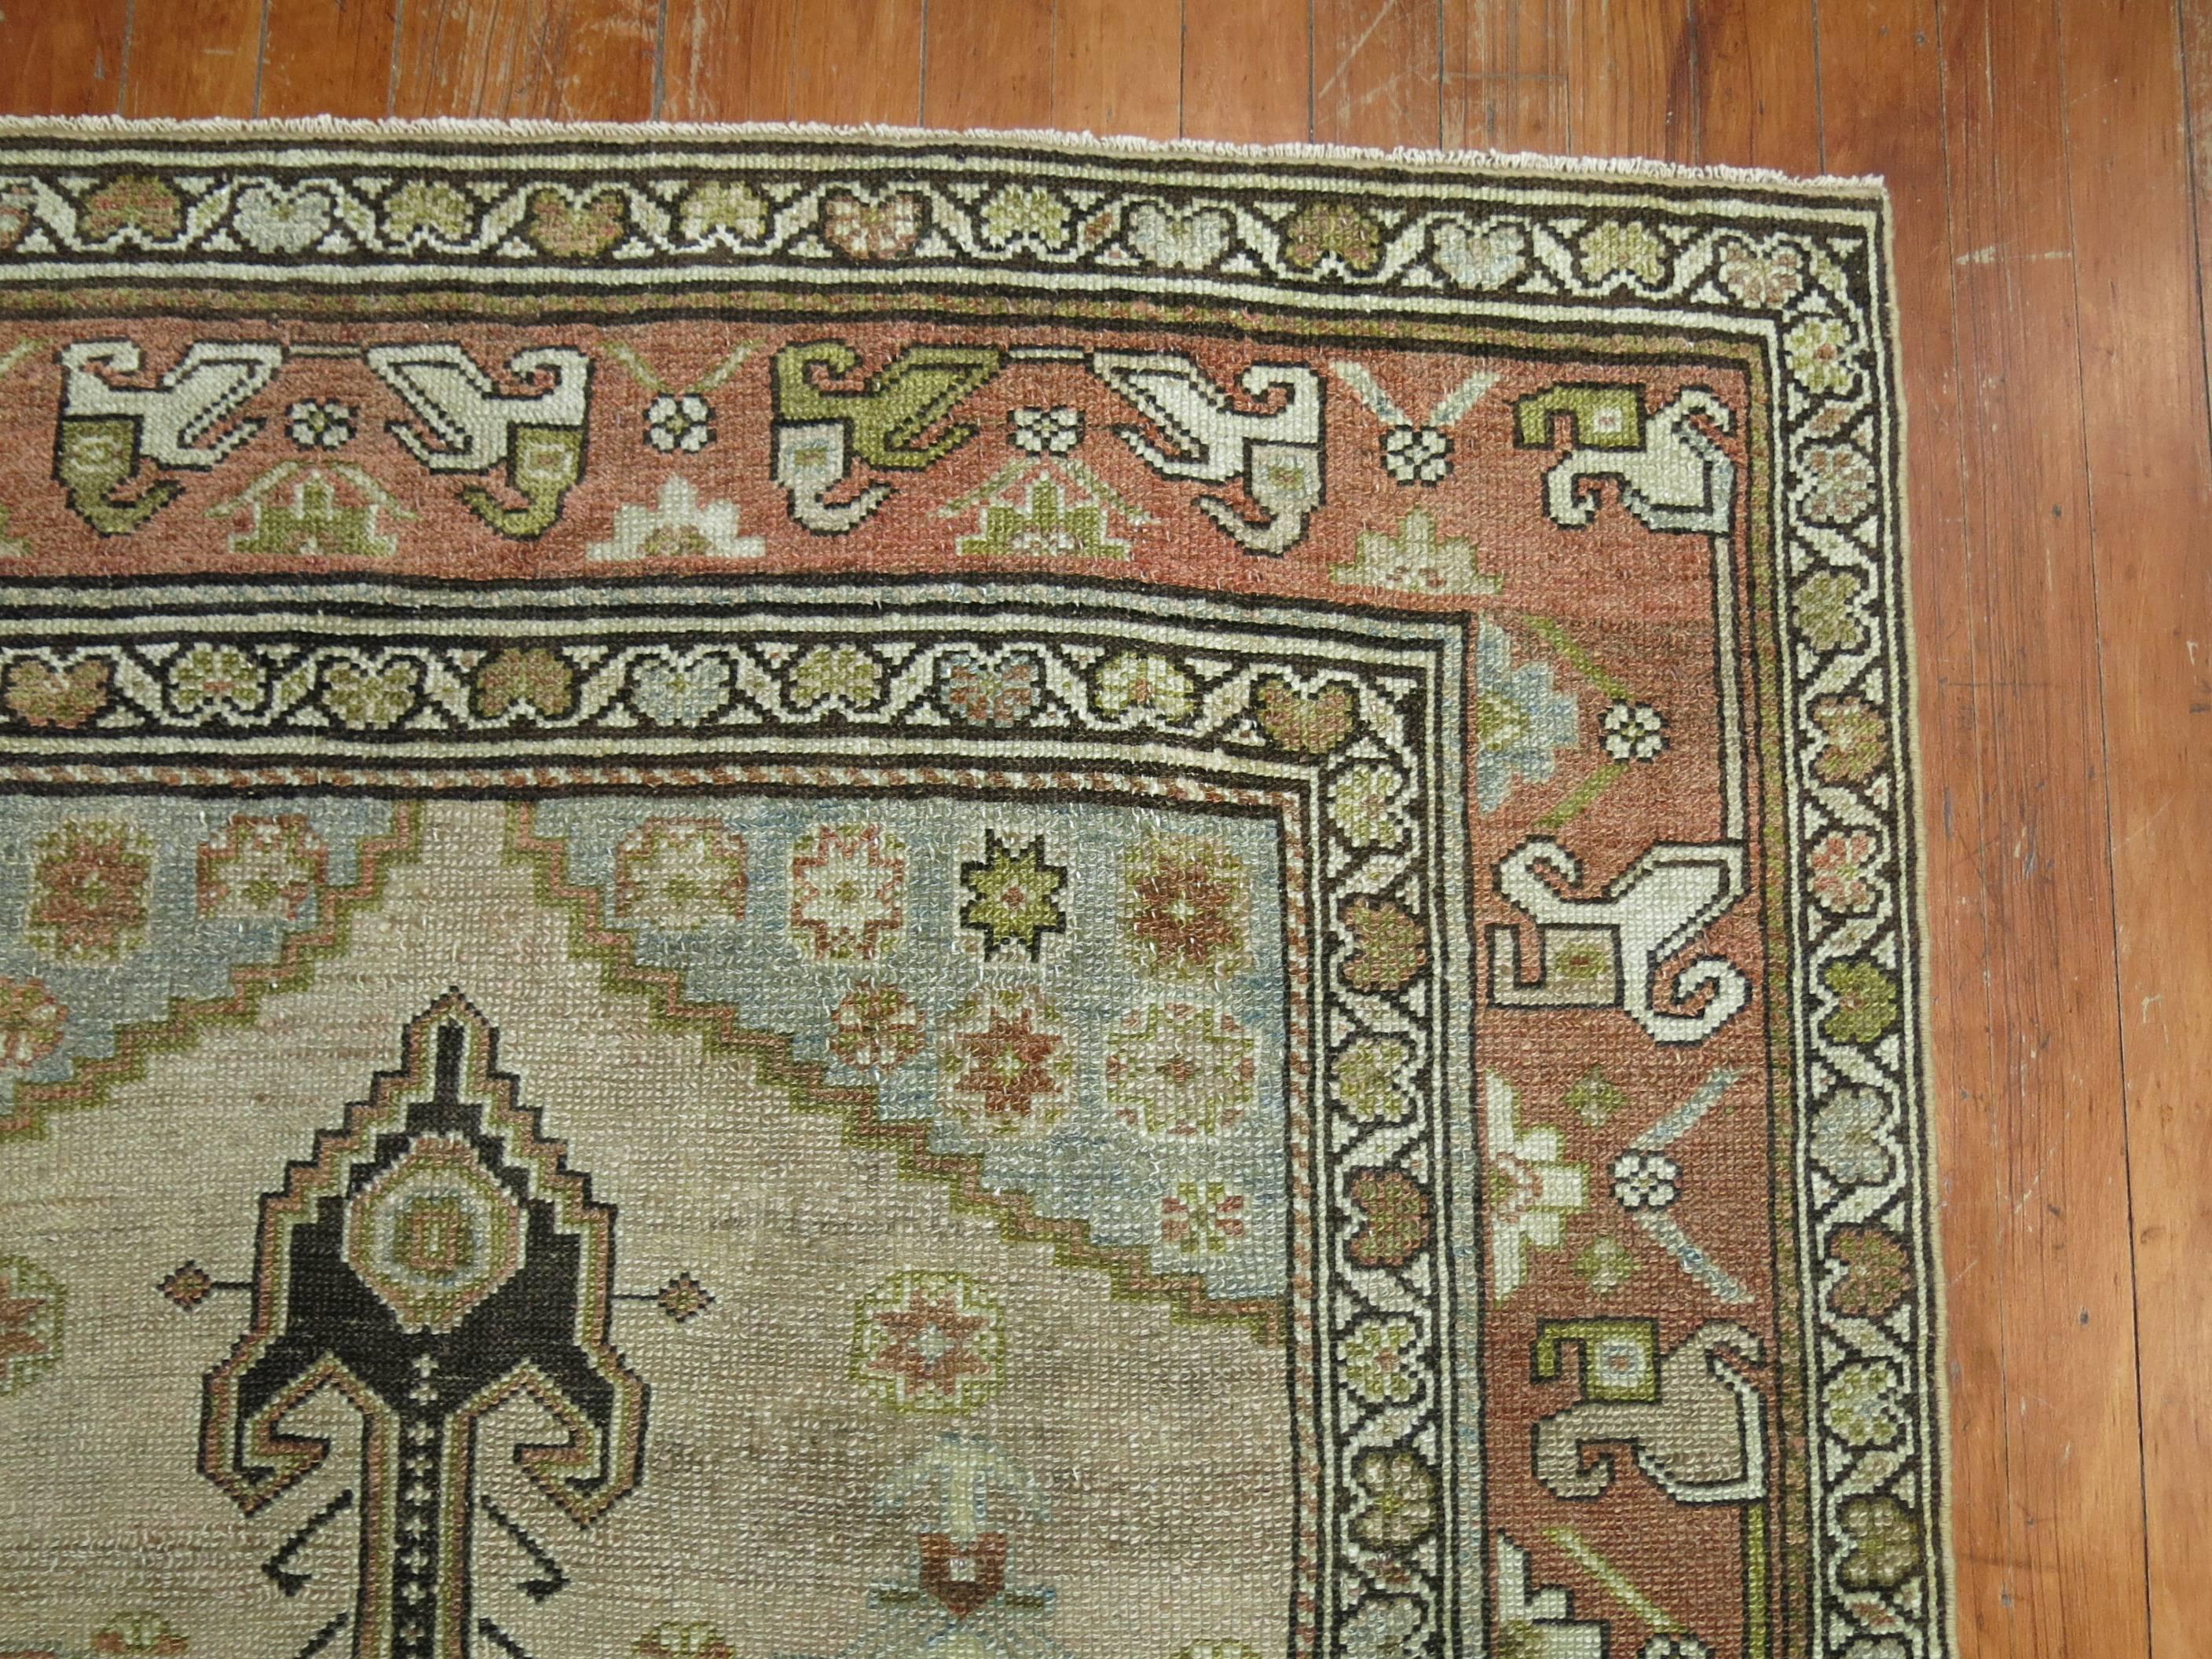 An early 20th century rare size Persian Malayer runner in earth tones.

Measures: 3'11